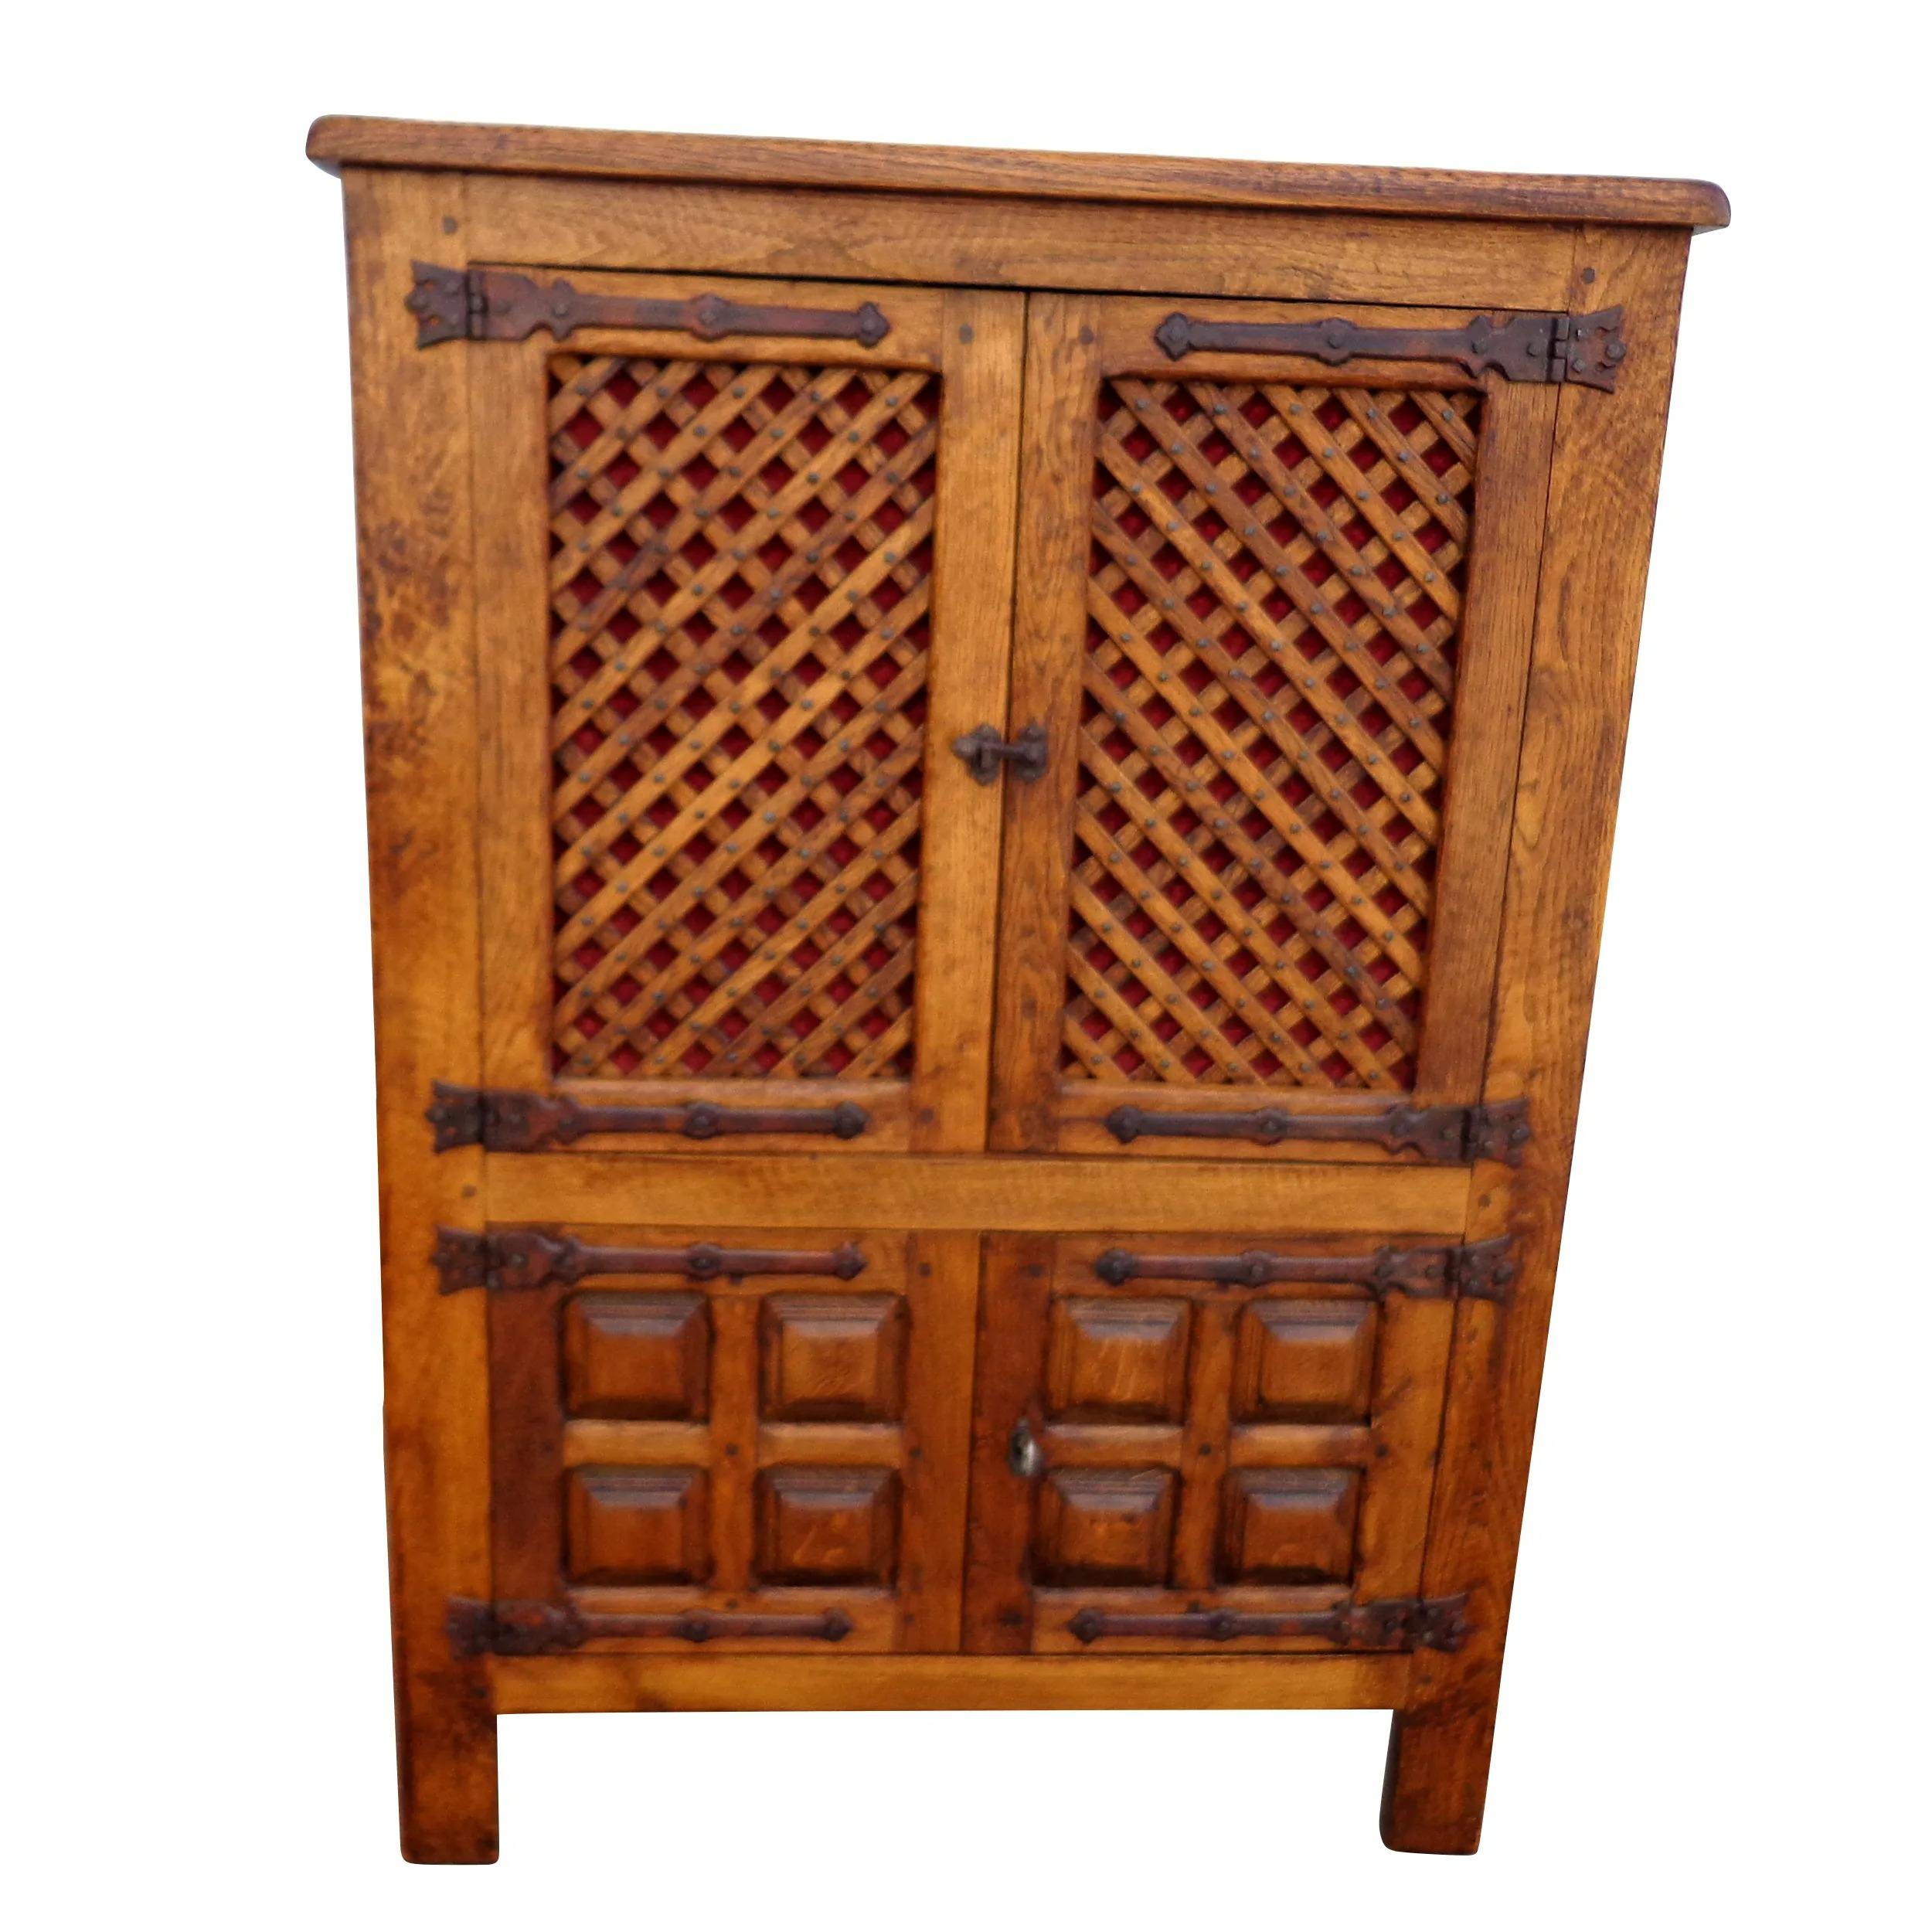 Large Chinese Country cabinet

Handsome solid elmwood cabinet, having lattice front cabinet doors and three shelves.